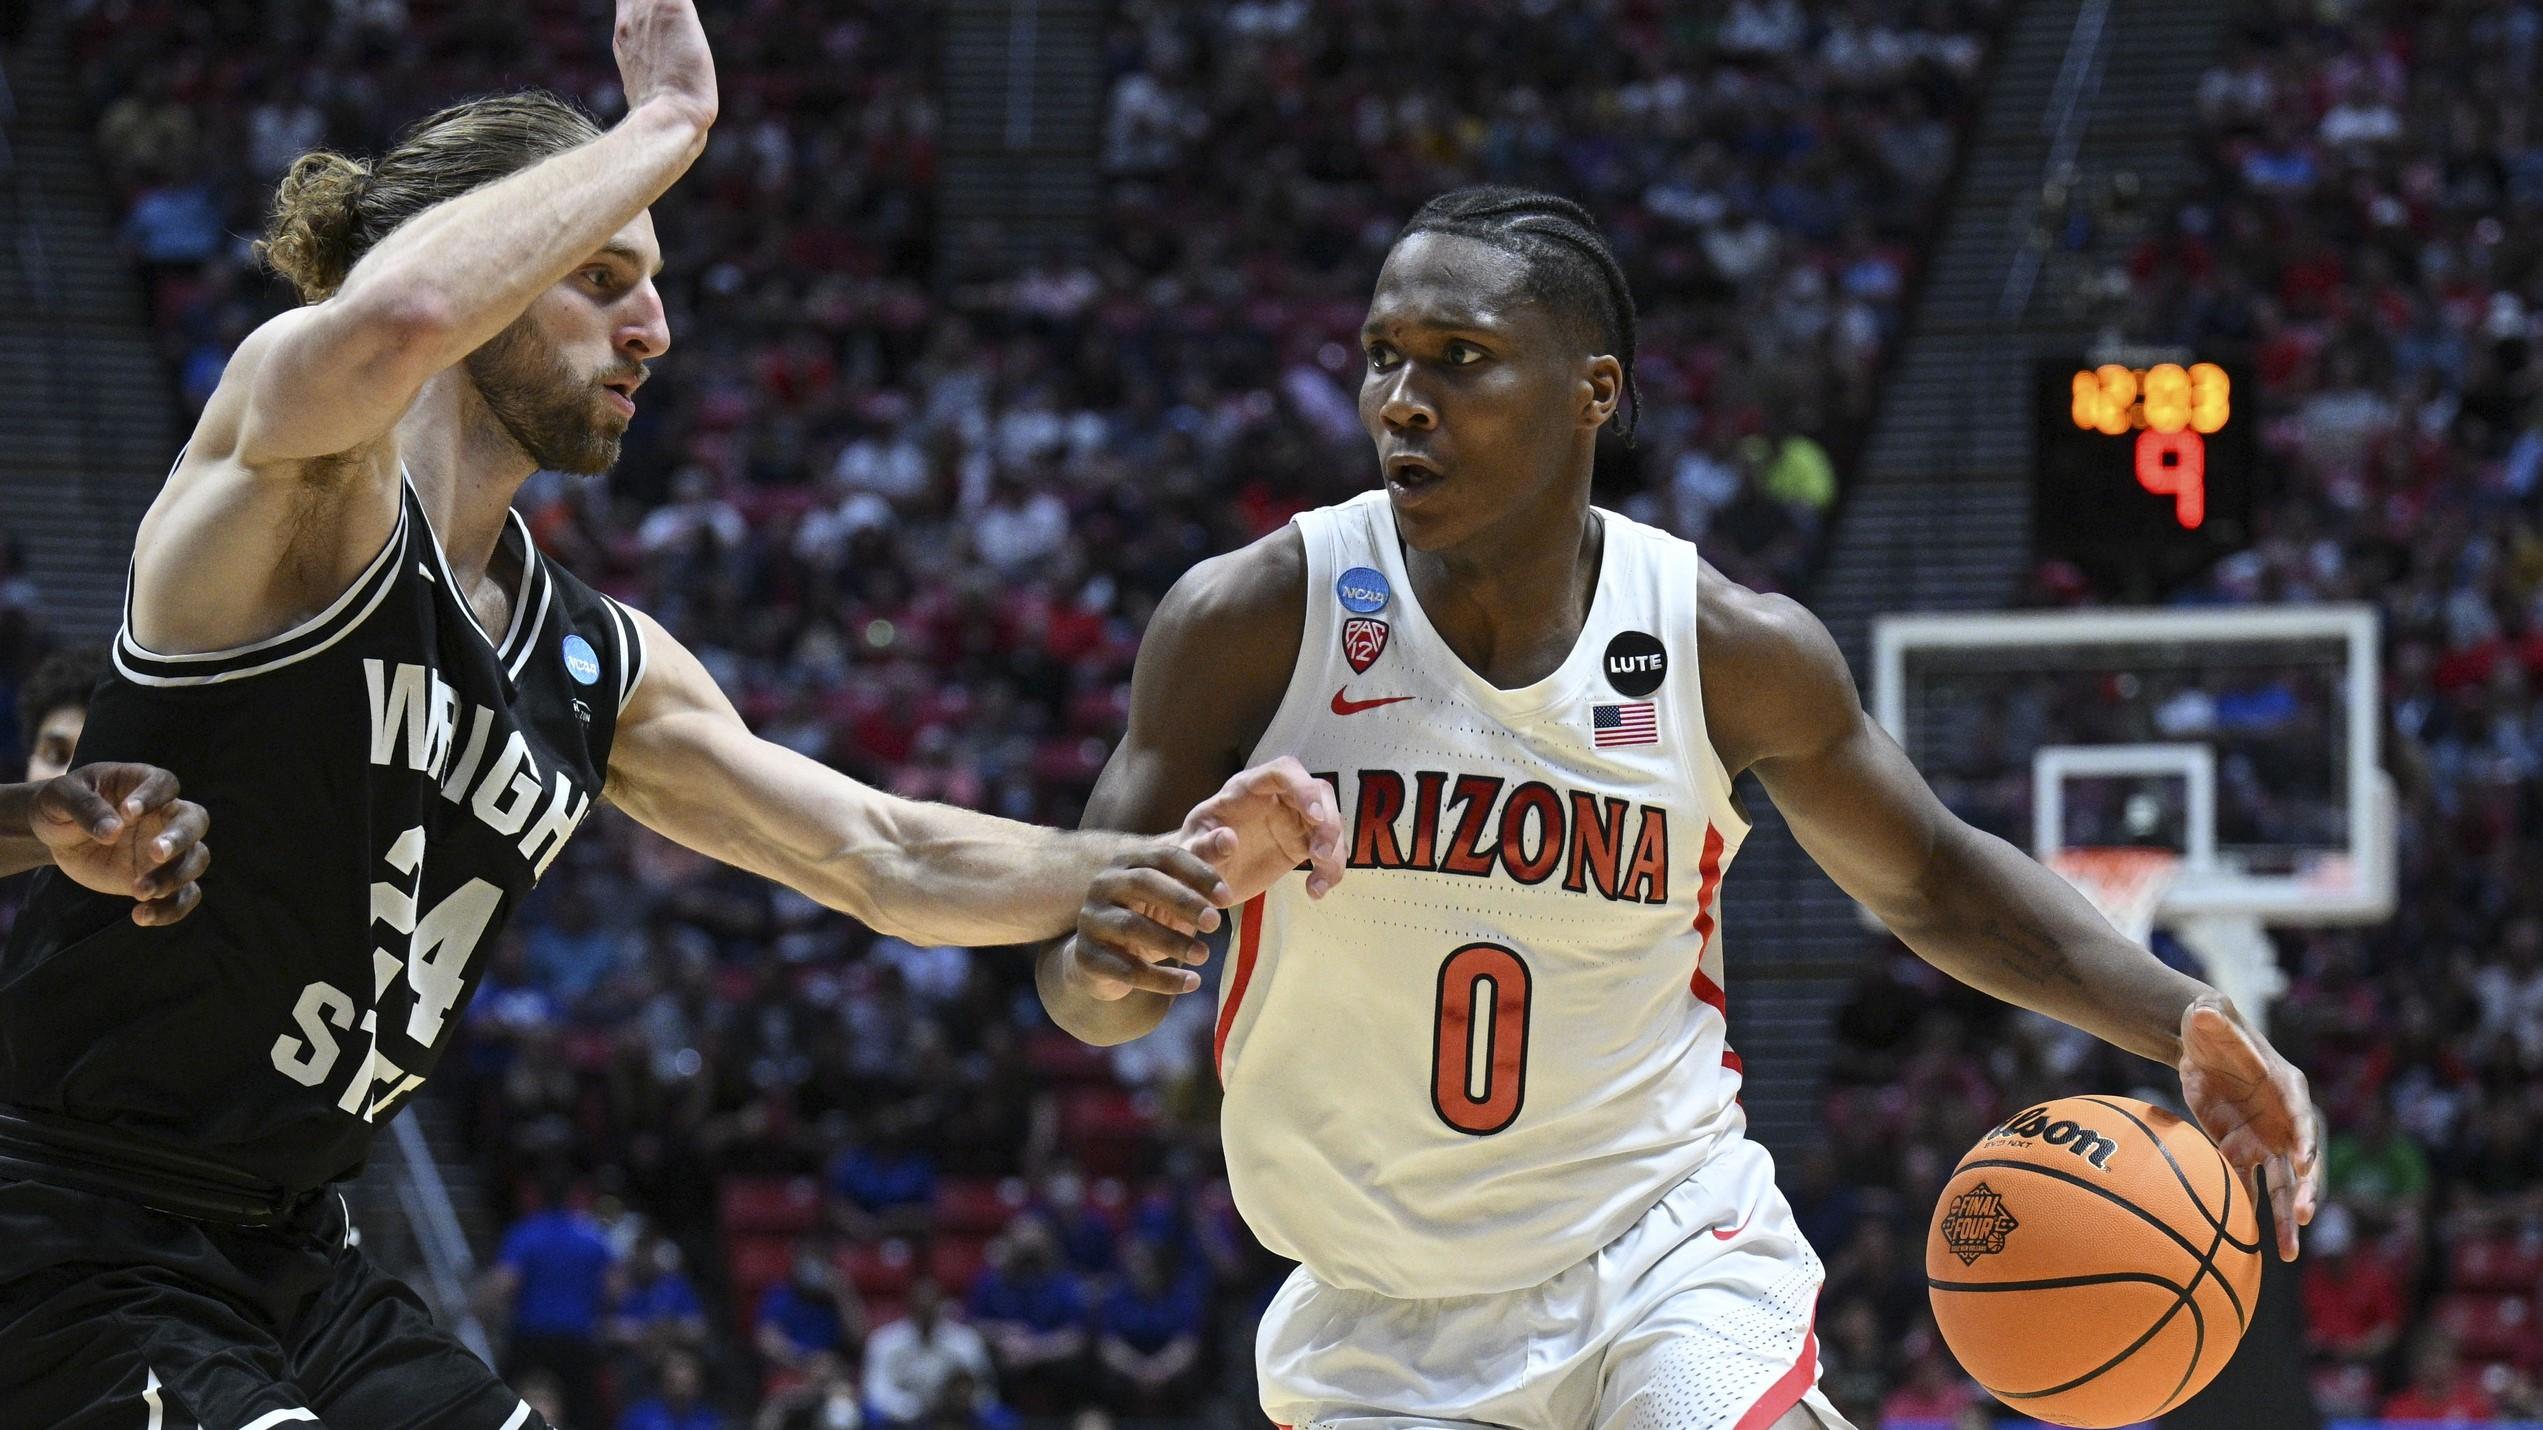 Mar 18, 2022; San Diego, CA, USA; Arizona Wildcats guard Bennedict Mathurin (0) dribbles the basketball against Wright State Raiders guard Tim Finke (24) during the second half during the first round of the 2022 NCAA Tournament at Viejas Arena. / Orlando Ramirez-USA TODAY Sports